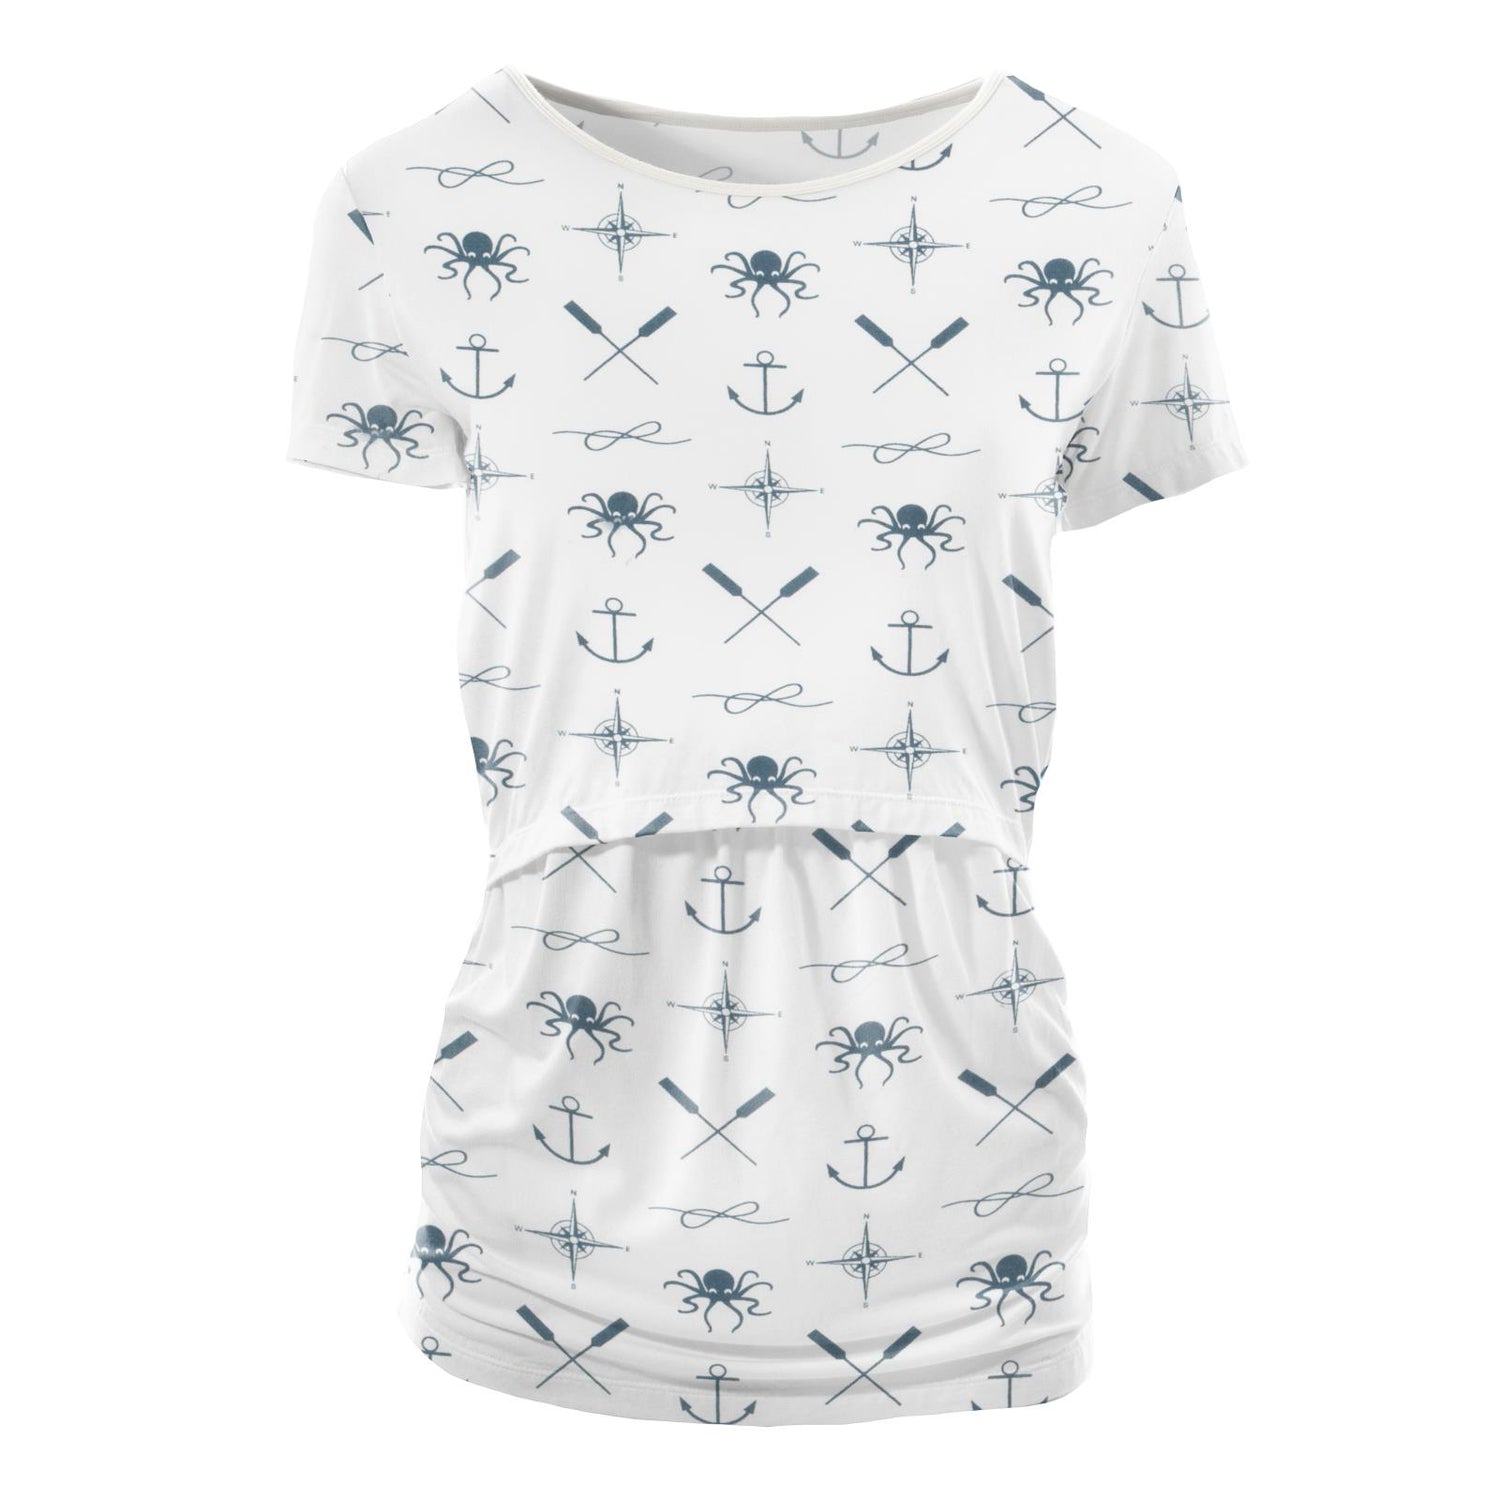 Women's Print Short Sleeve Nursing Tee in Natural Captain and Crew